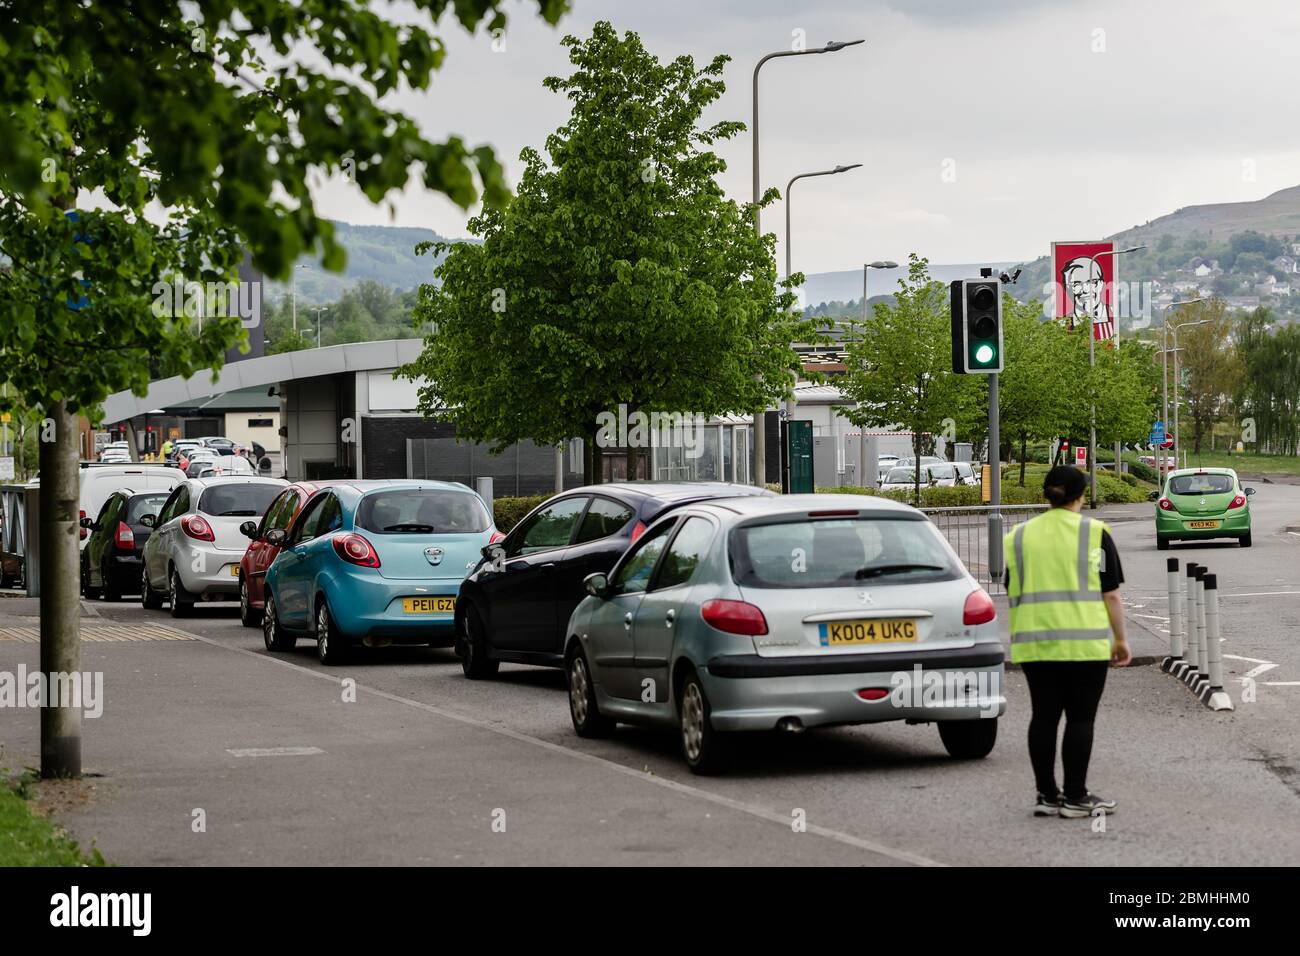 MERTHYR TYDFIL, WALES - 09 MAY 2020: KFC worker stops cars entering the driver through to KFC as its full. Stock Photo